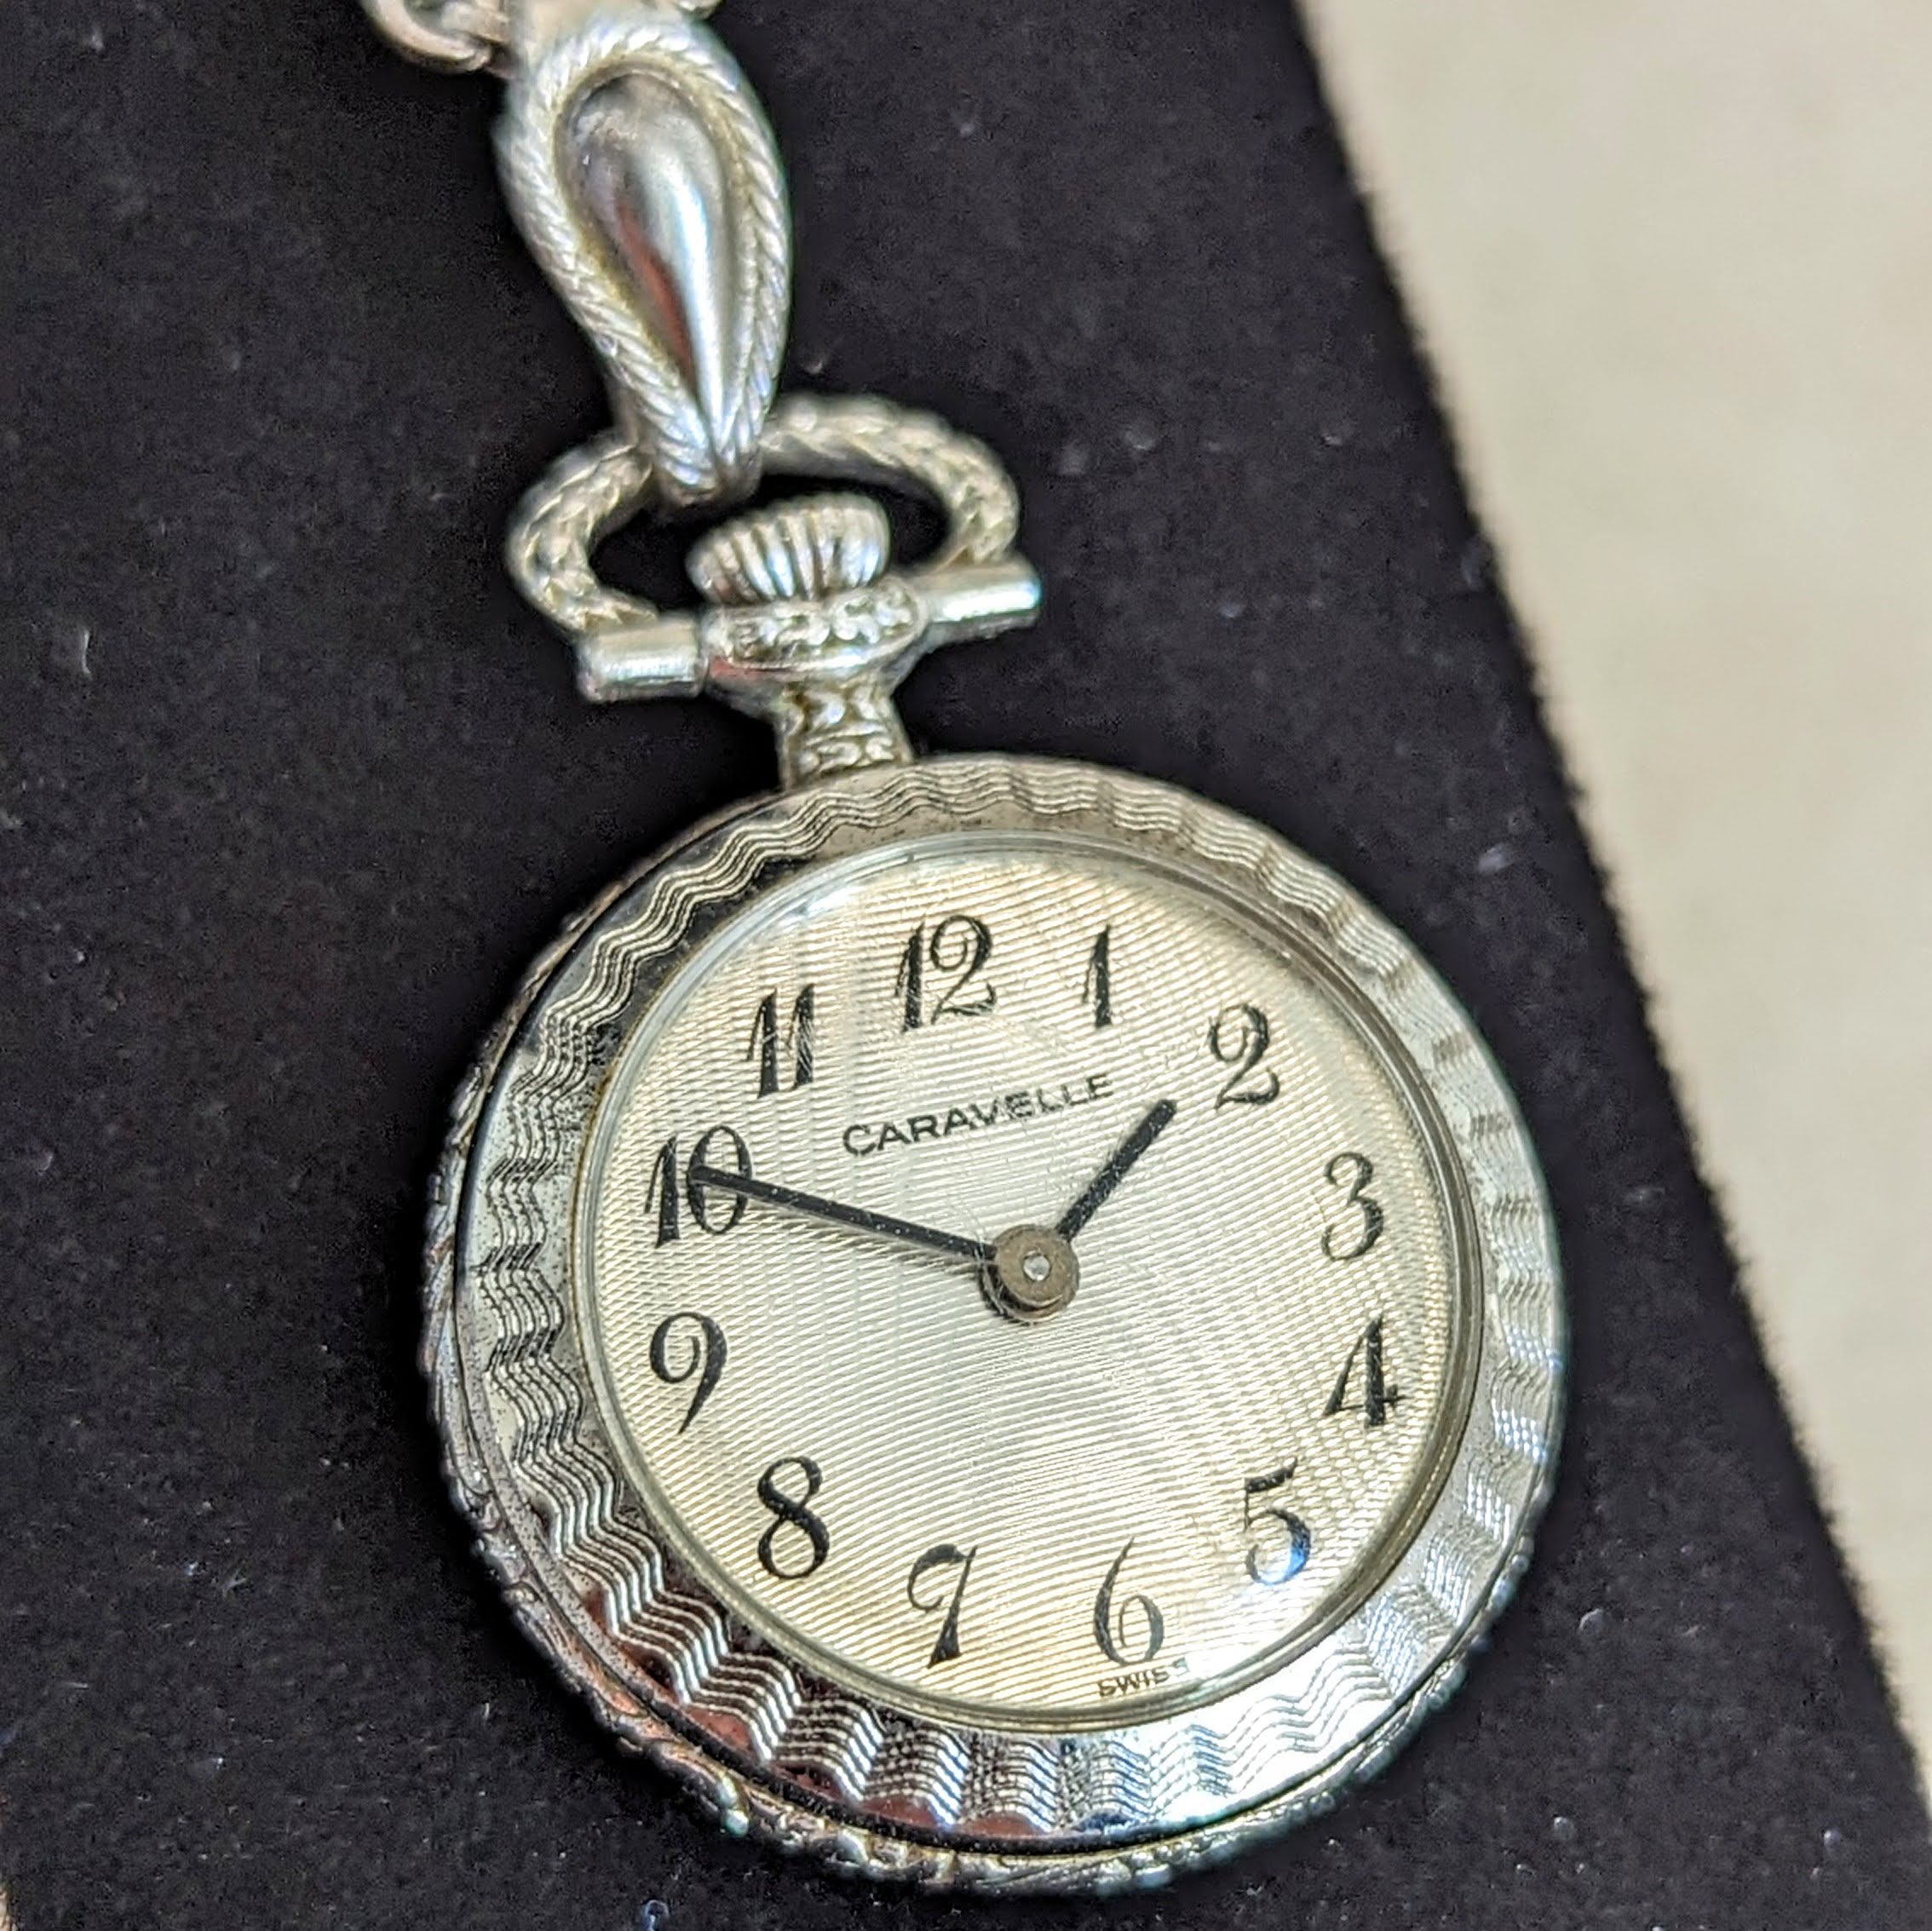 Vintage Caravelle in very good Condition 7 Jewel Orb Pendant Watch - Ruby  Lane